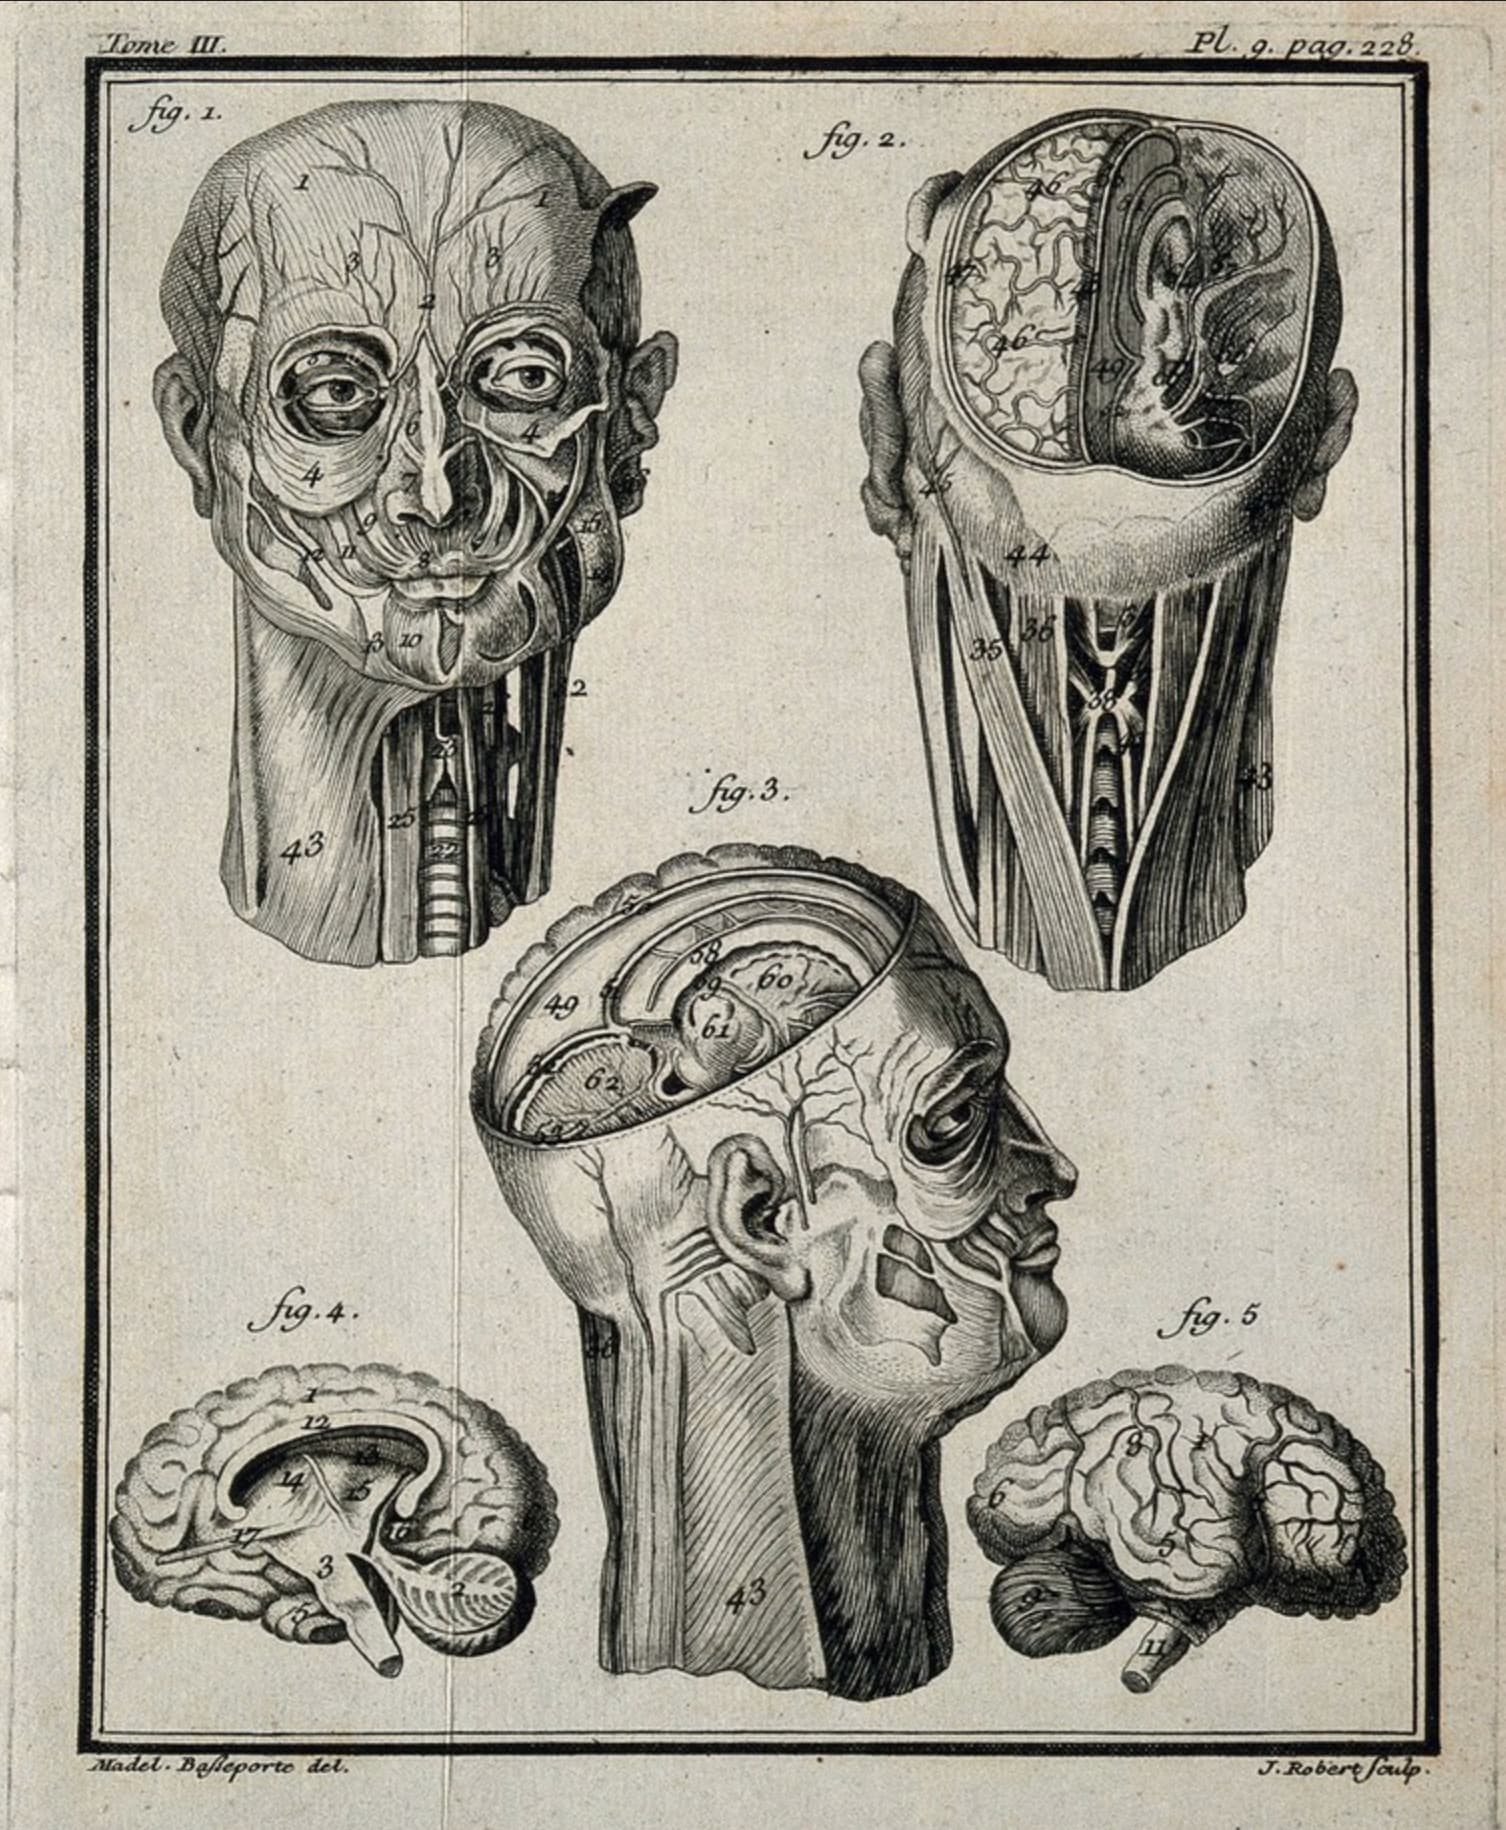 Wax models of the head and neck (figs 1-3), and of the right hemisphere of the brain (figs 4-5)